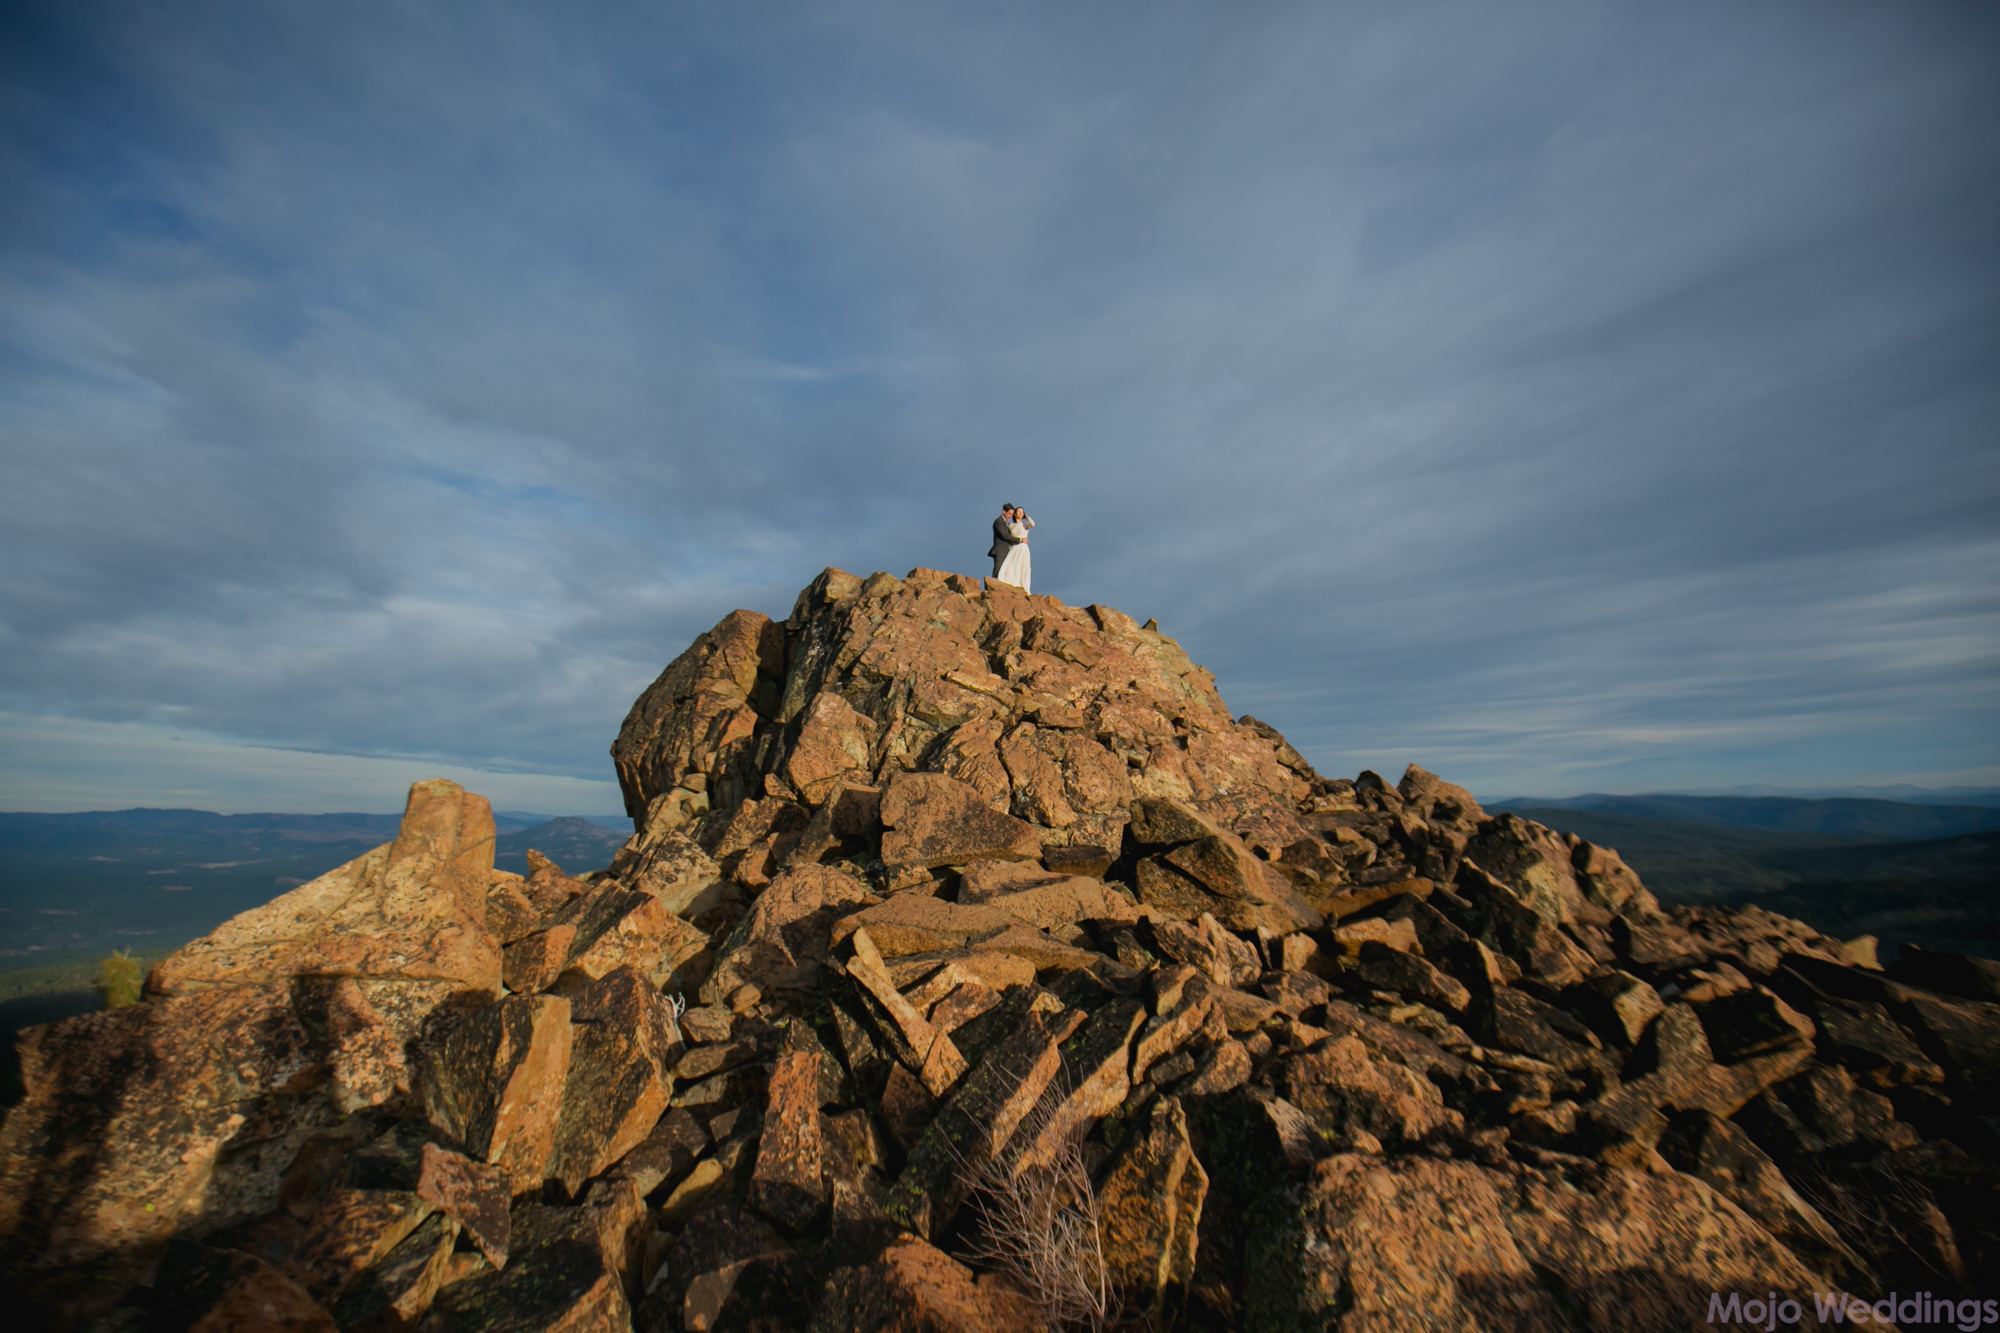 The bride and groom are small on top of a glowing orange rocky mountaintop with dark blue cloudy skies behind them.